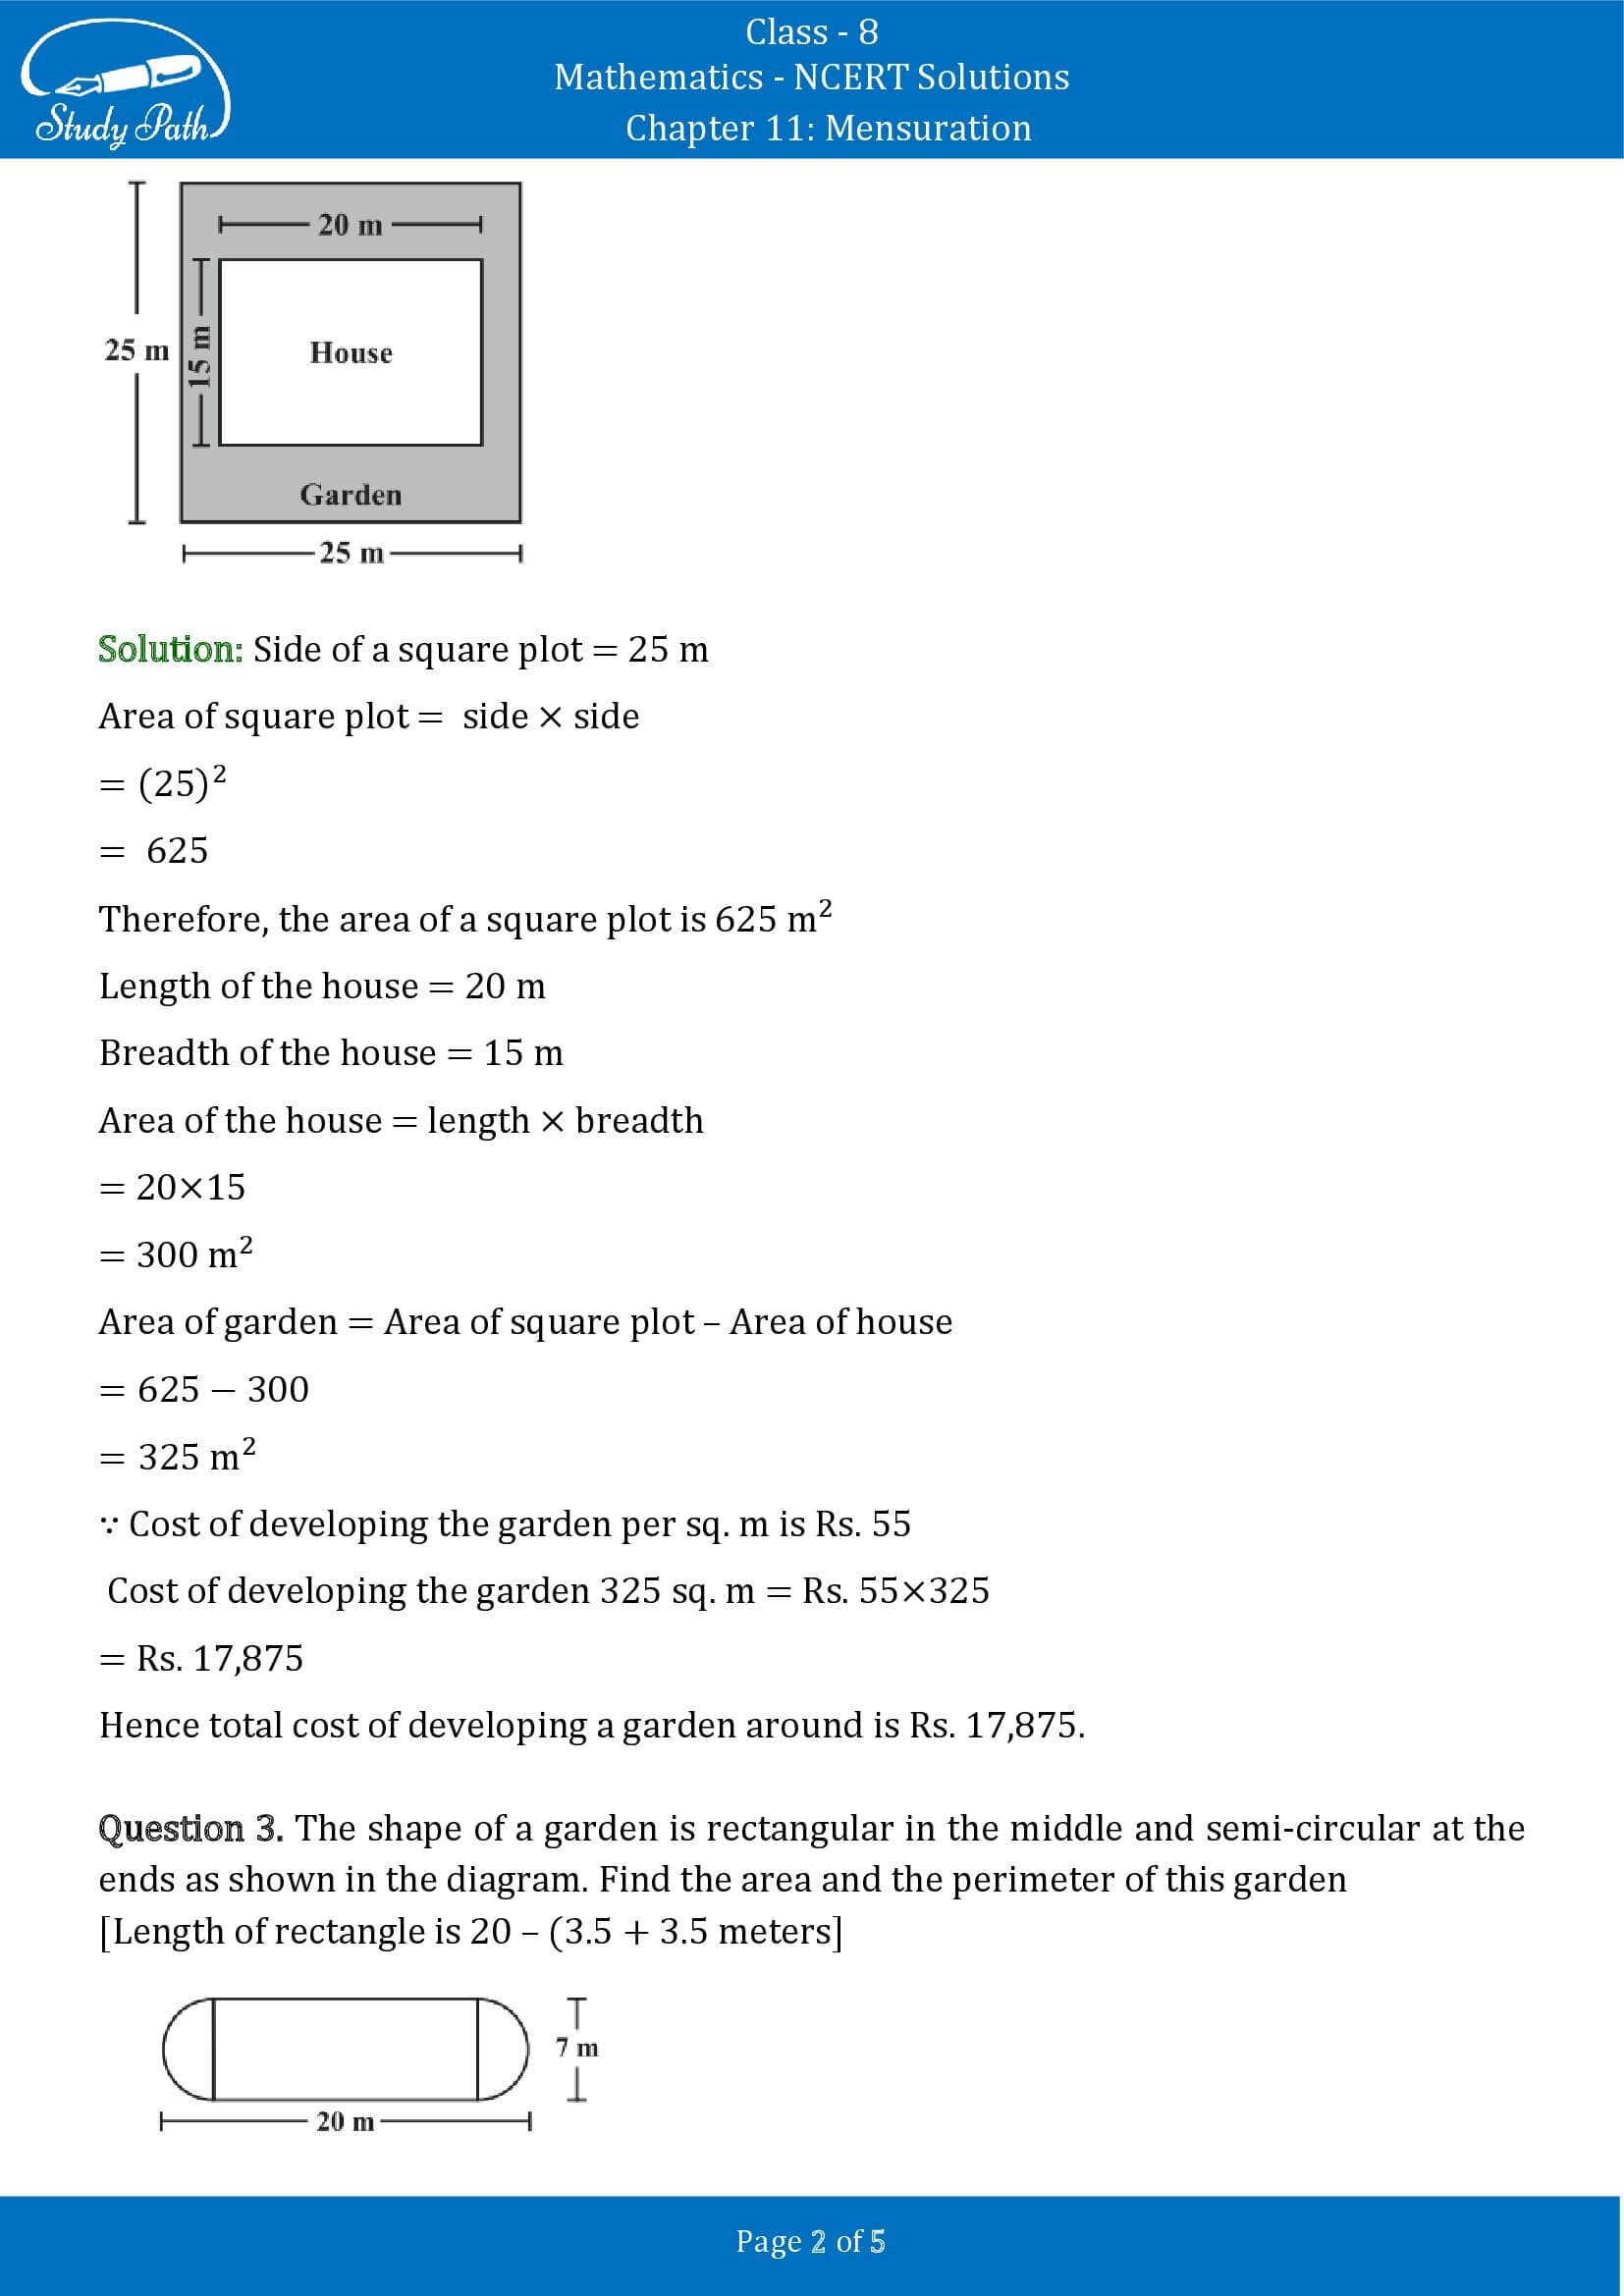 NCERT Solutions for Class 8 Maths Chapter 11 Mensuration Exercise 11.1 00002